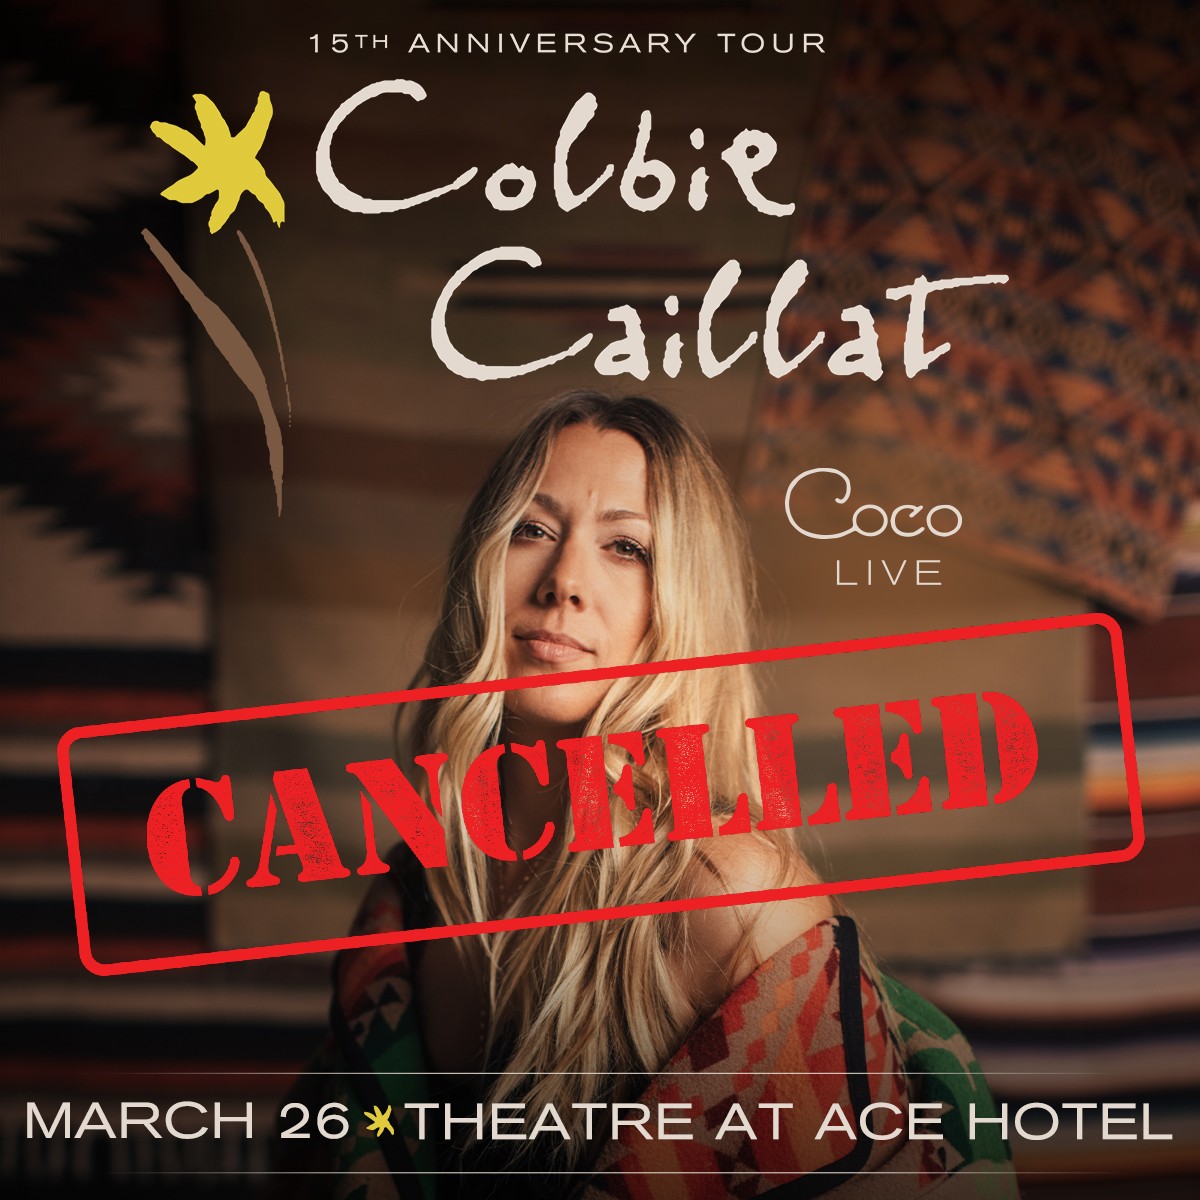 Colbie Caillat cancellation notice